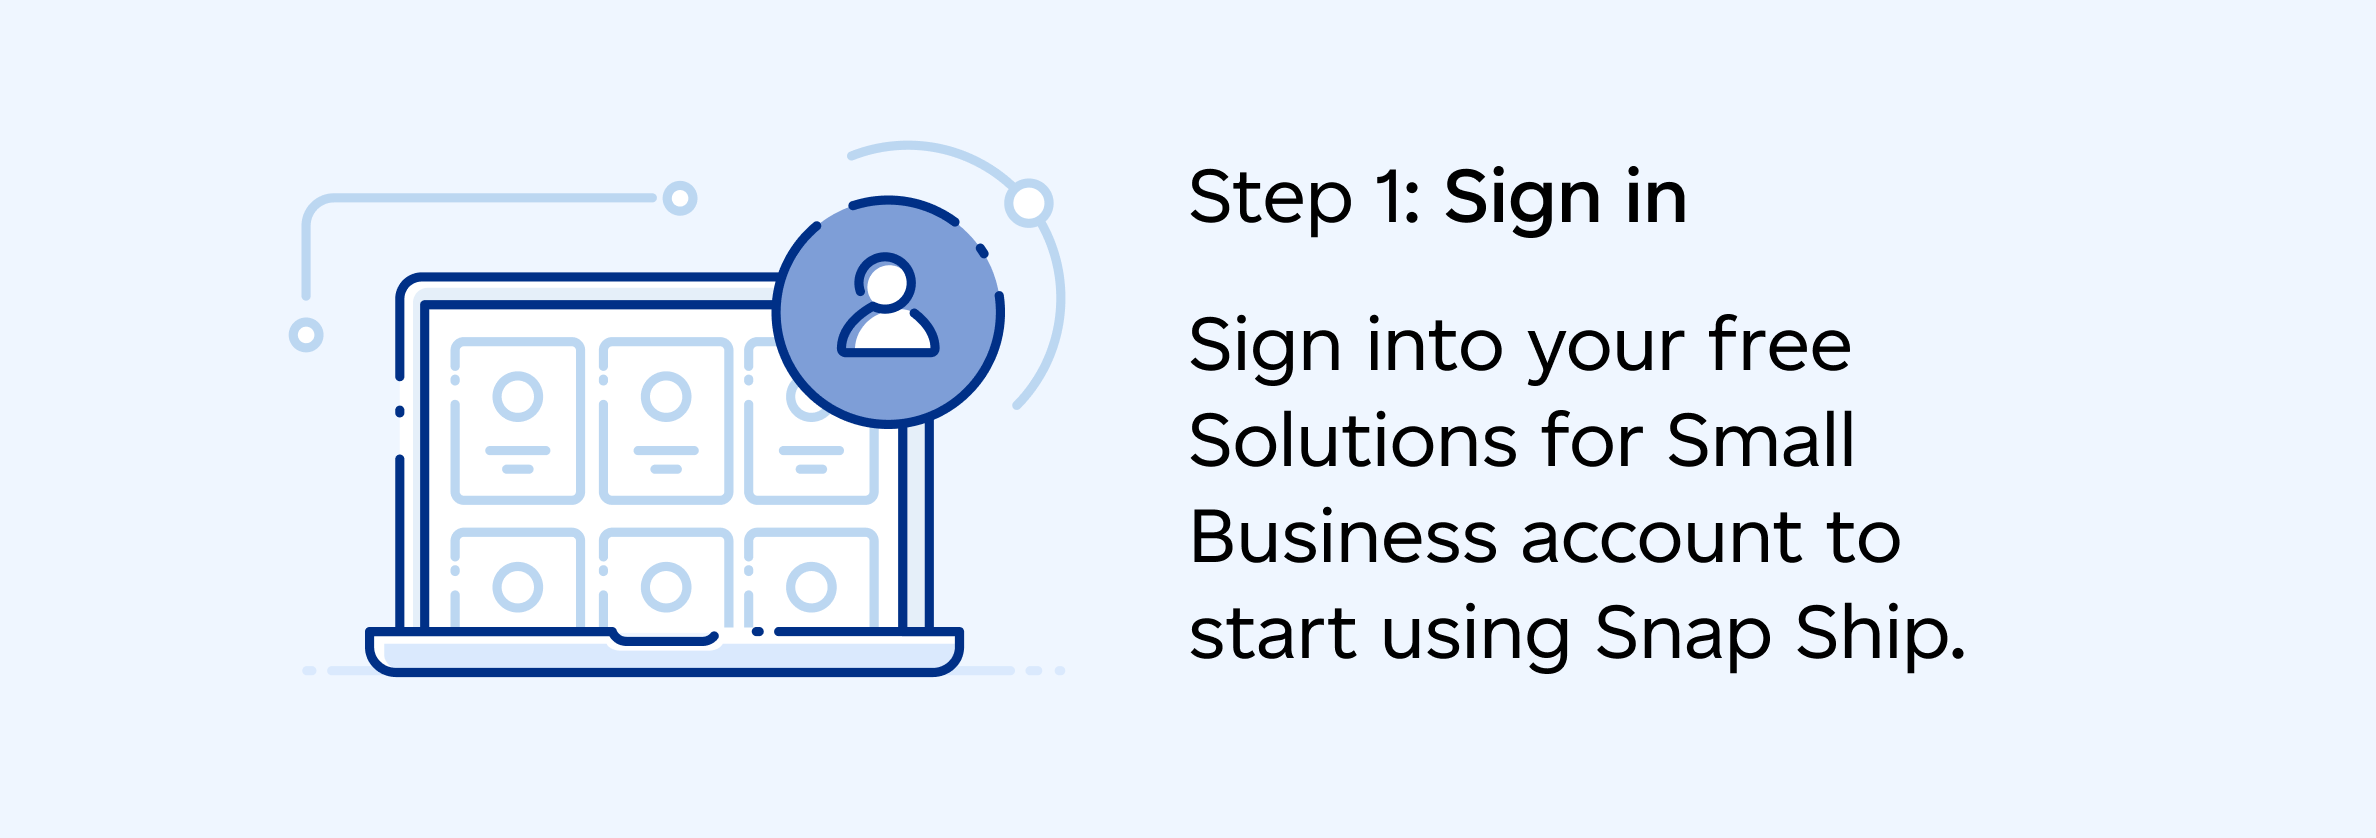 Step 1: Log in to your free Solutions for Small Business account to start using Snap Ship.